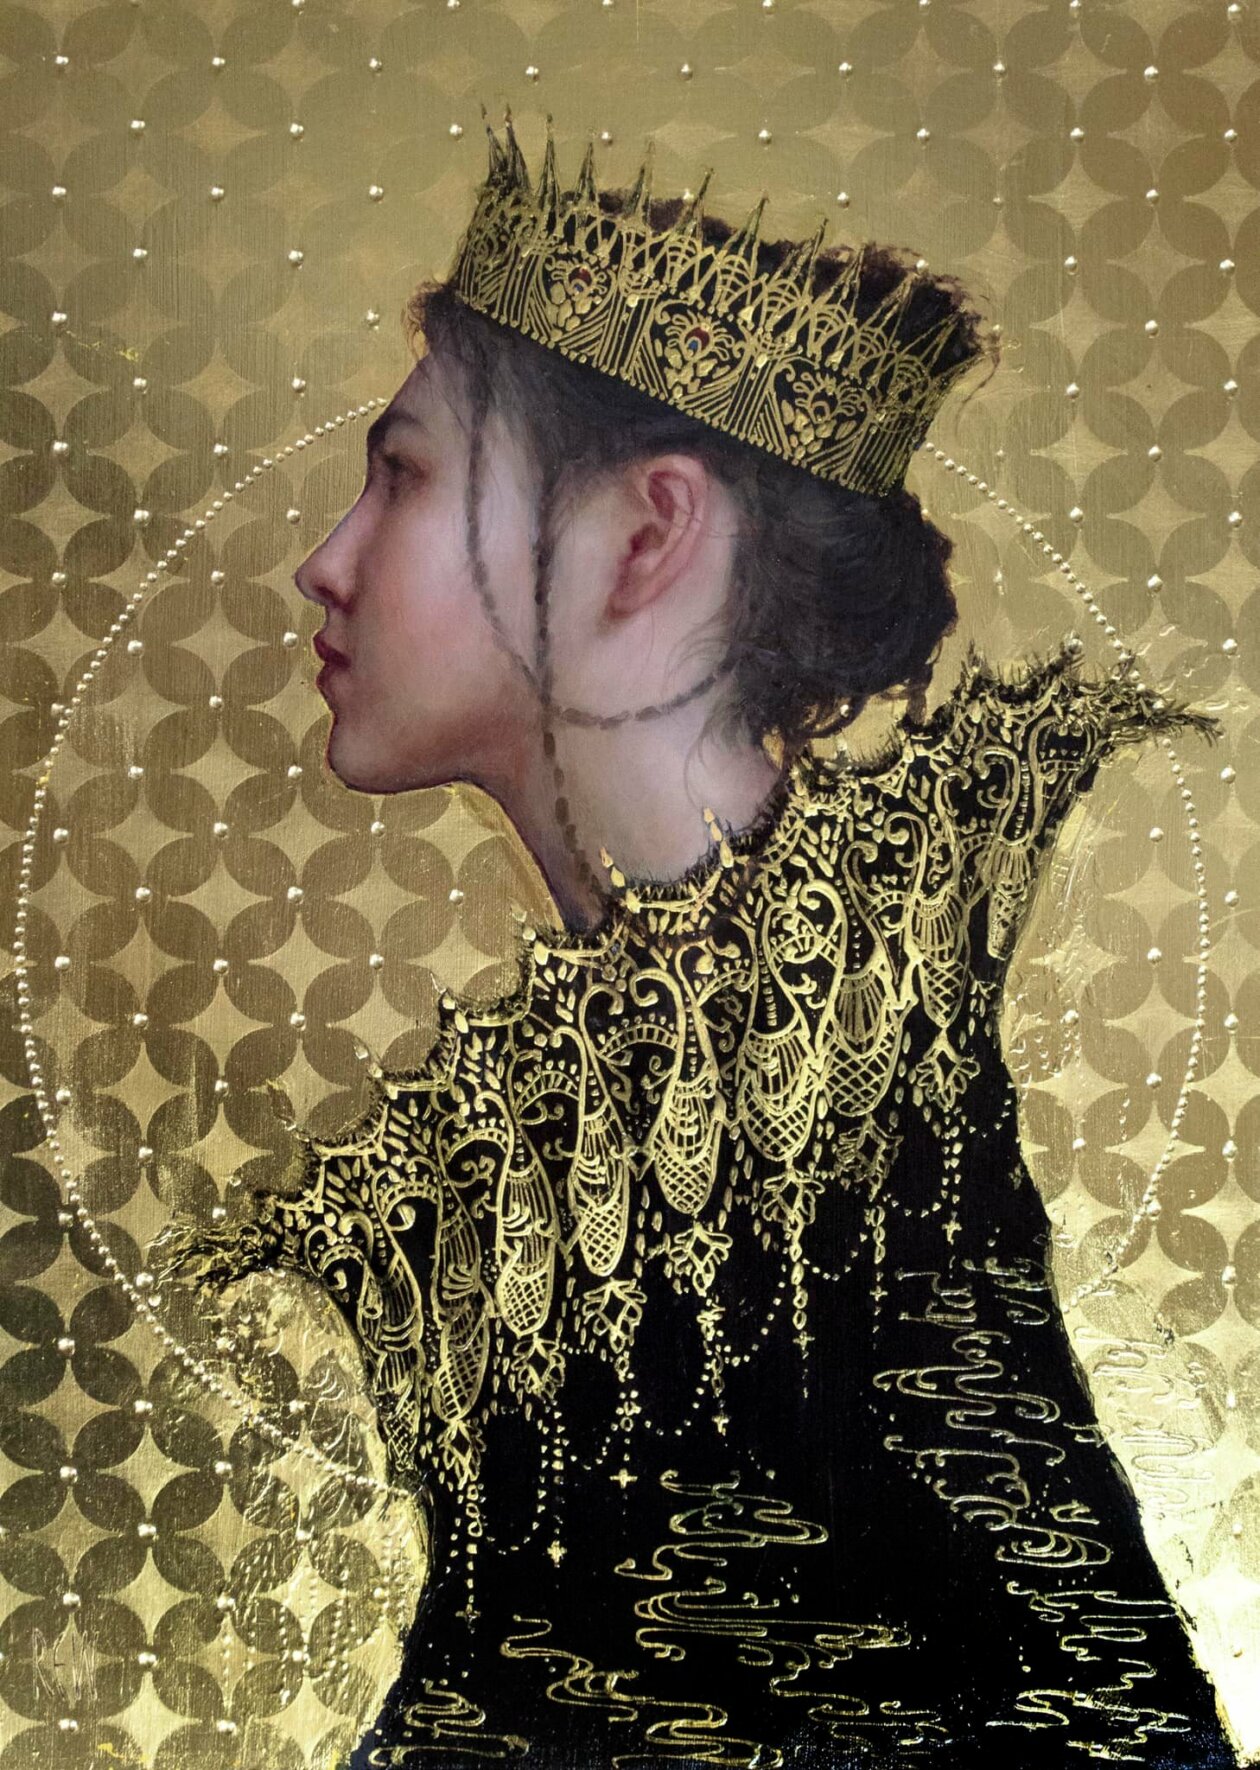 Realistic Figurative Paintings With Gold Ornaments By Stephanie Rew (19)